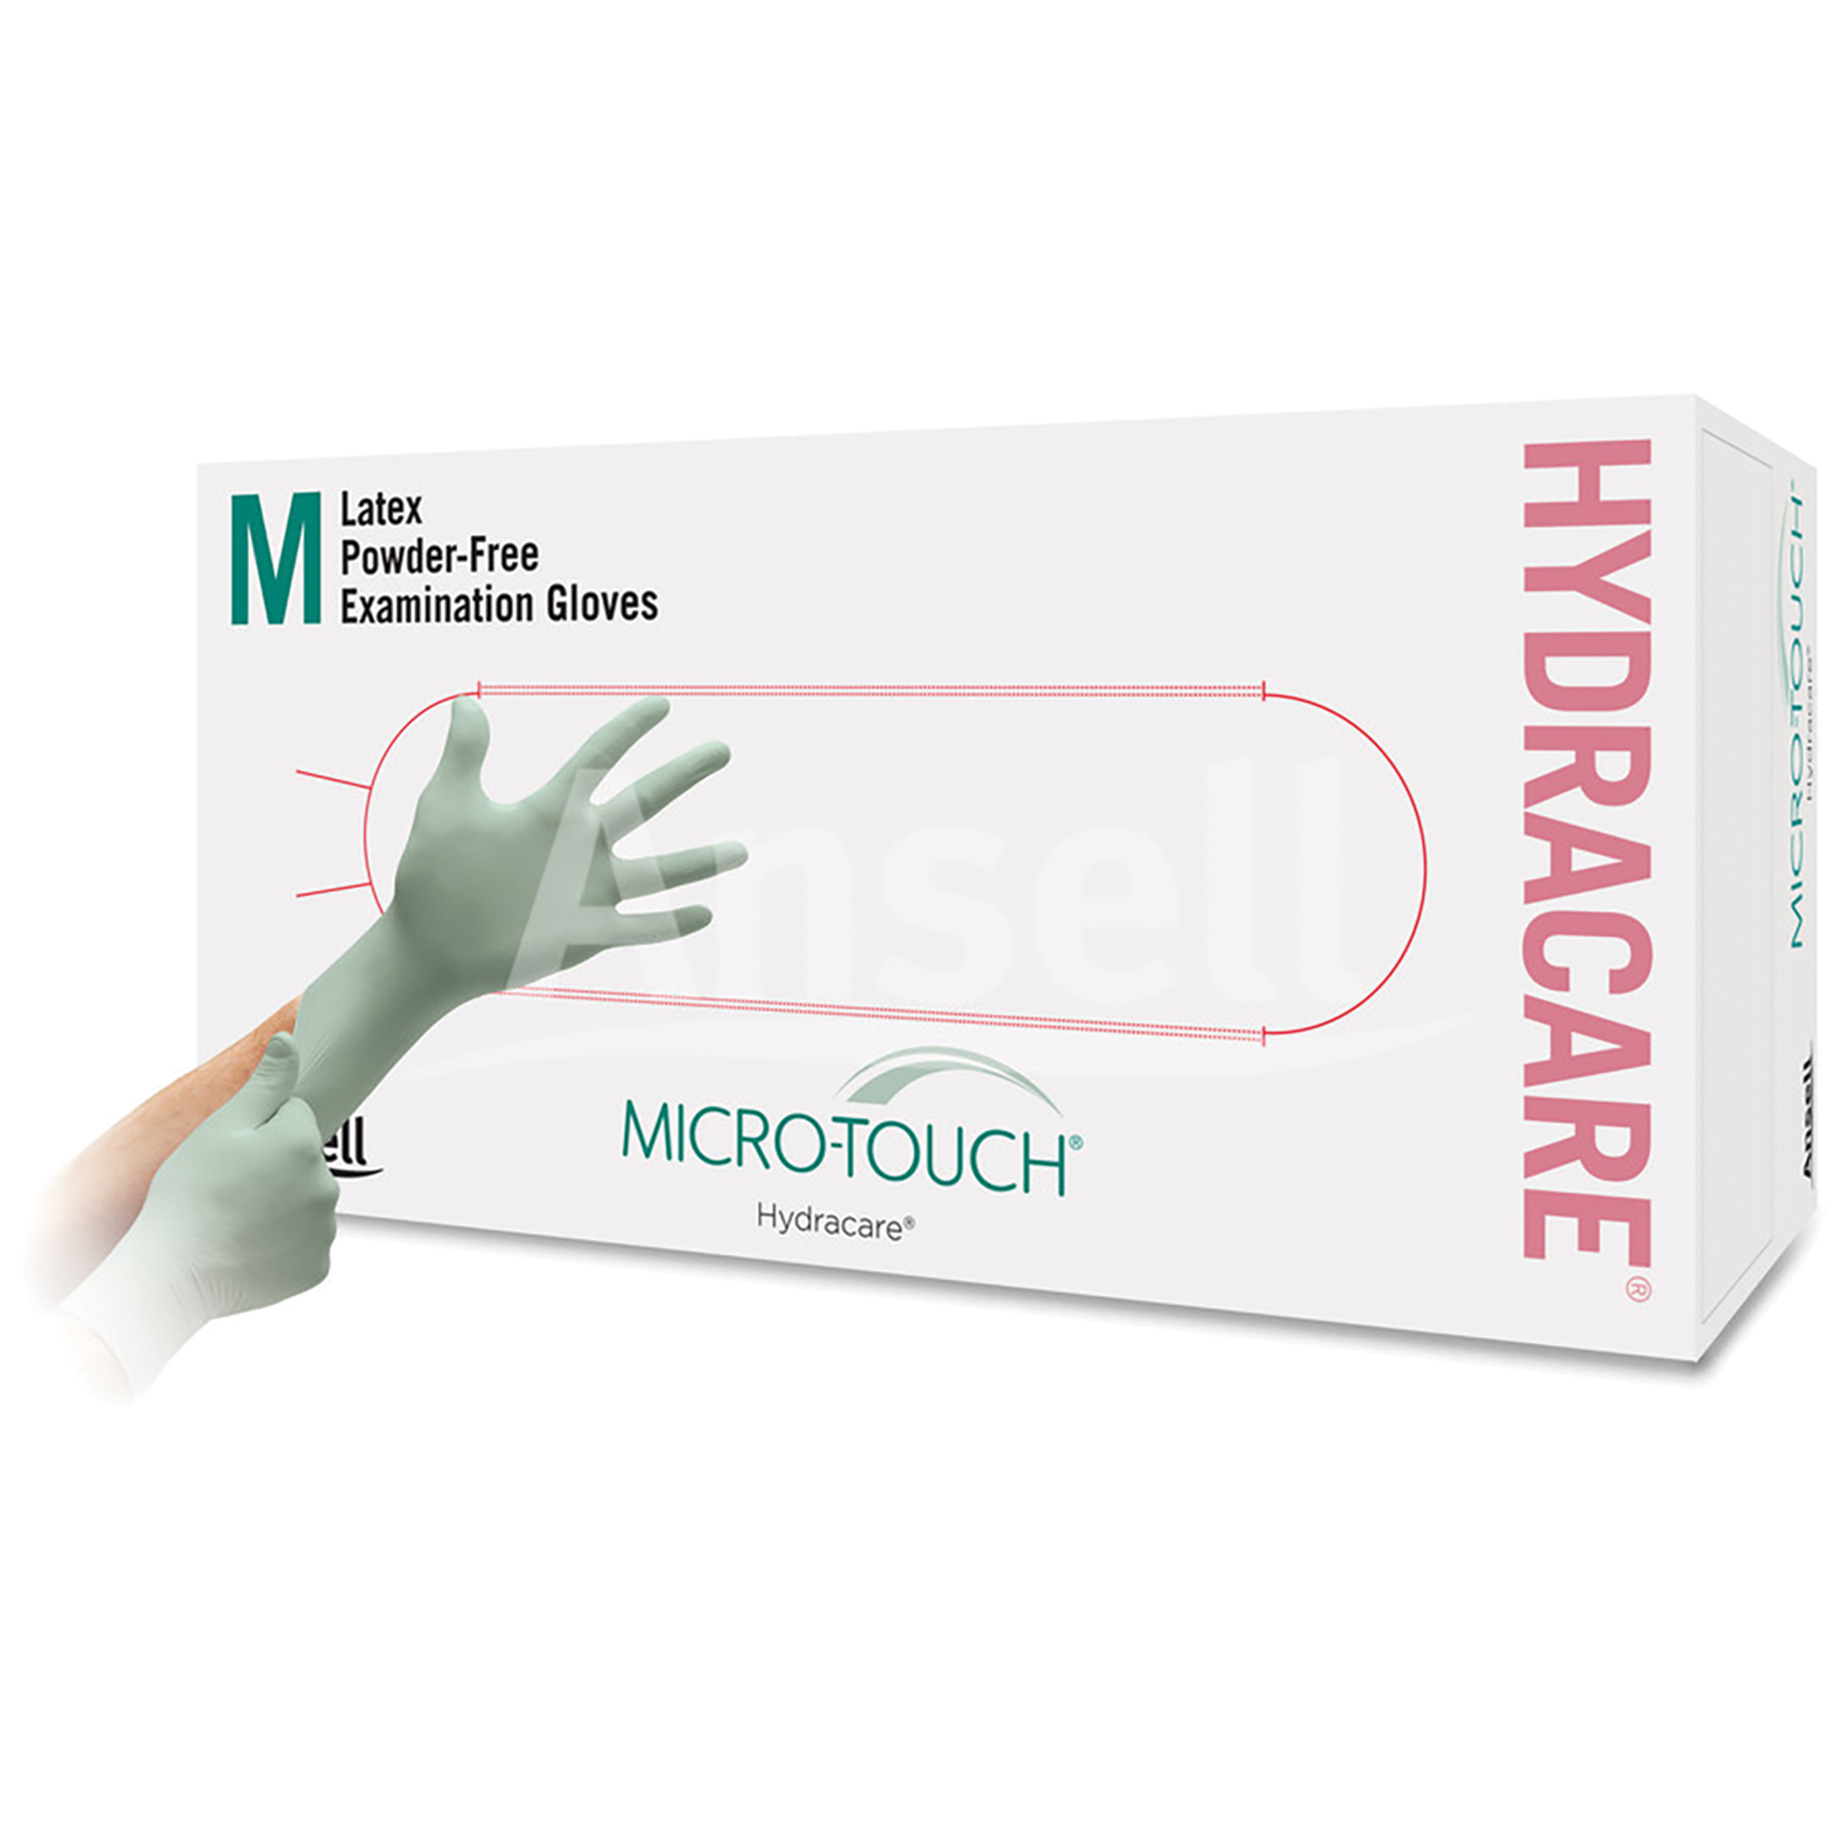 Micro-Touch HydraCare Latex Examination Gloves Large 